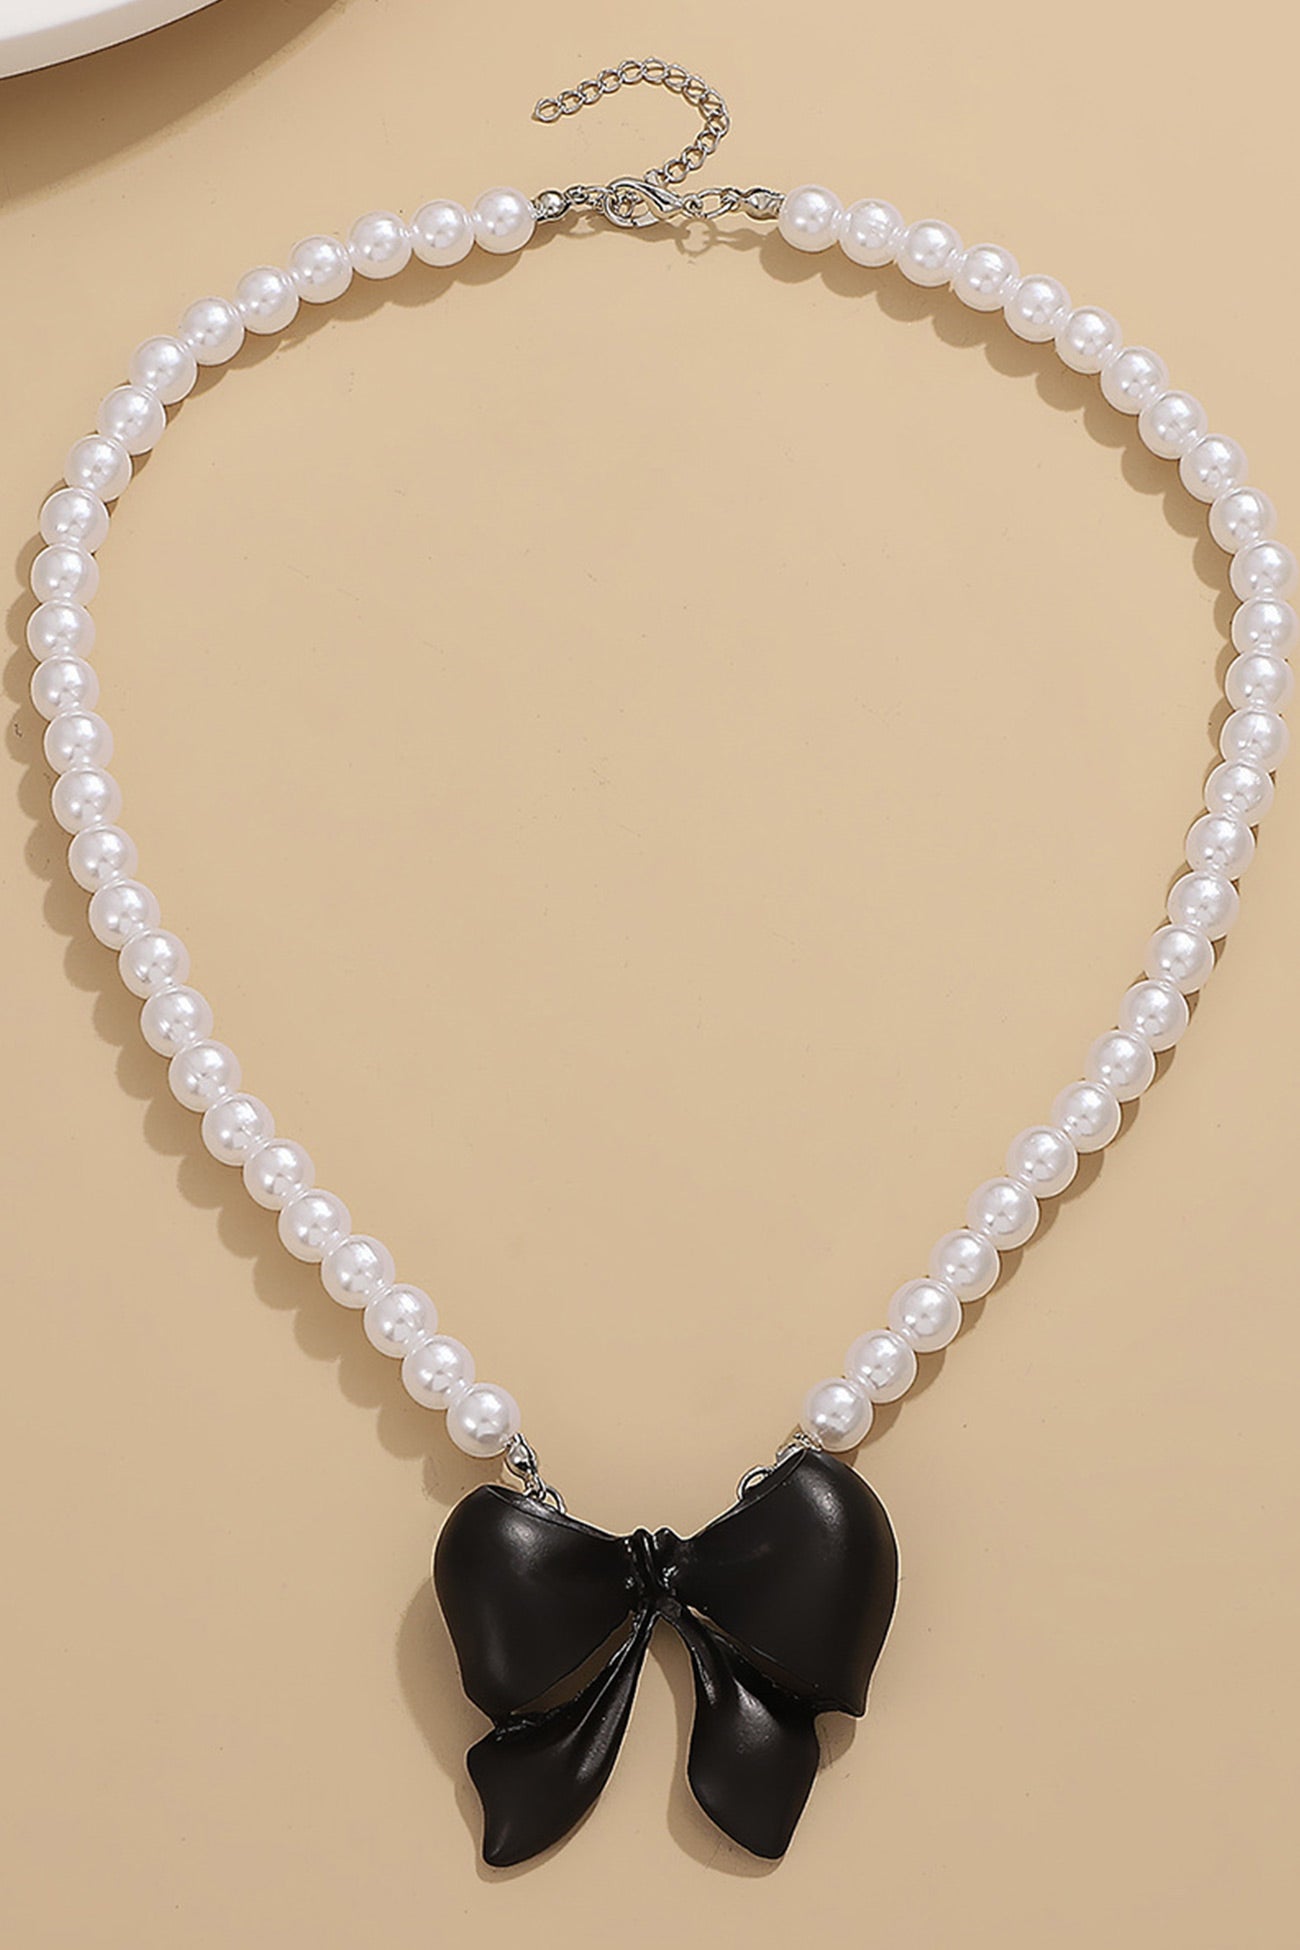 Flytonn-Valentine's Day gift Pearl Bow-tie Pendant Necklaces